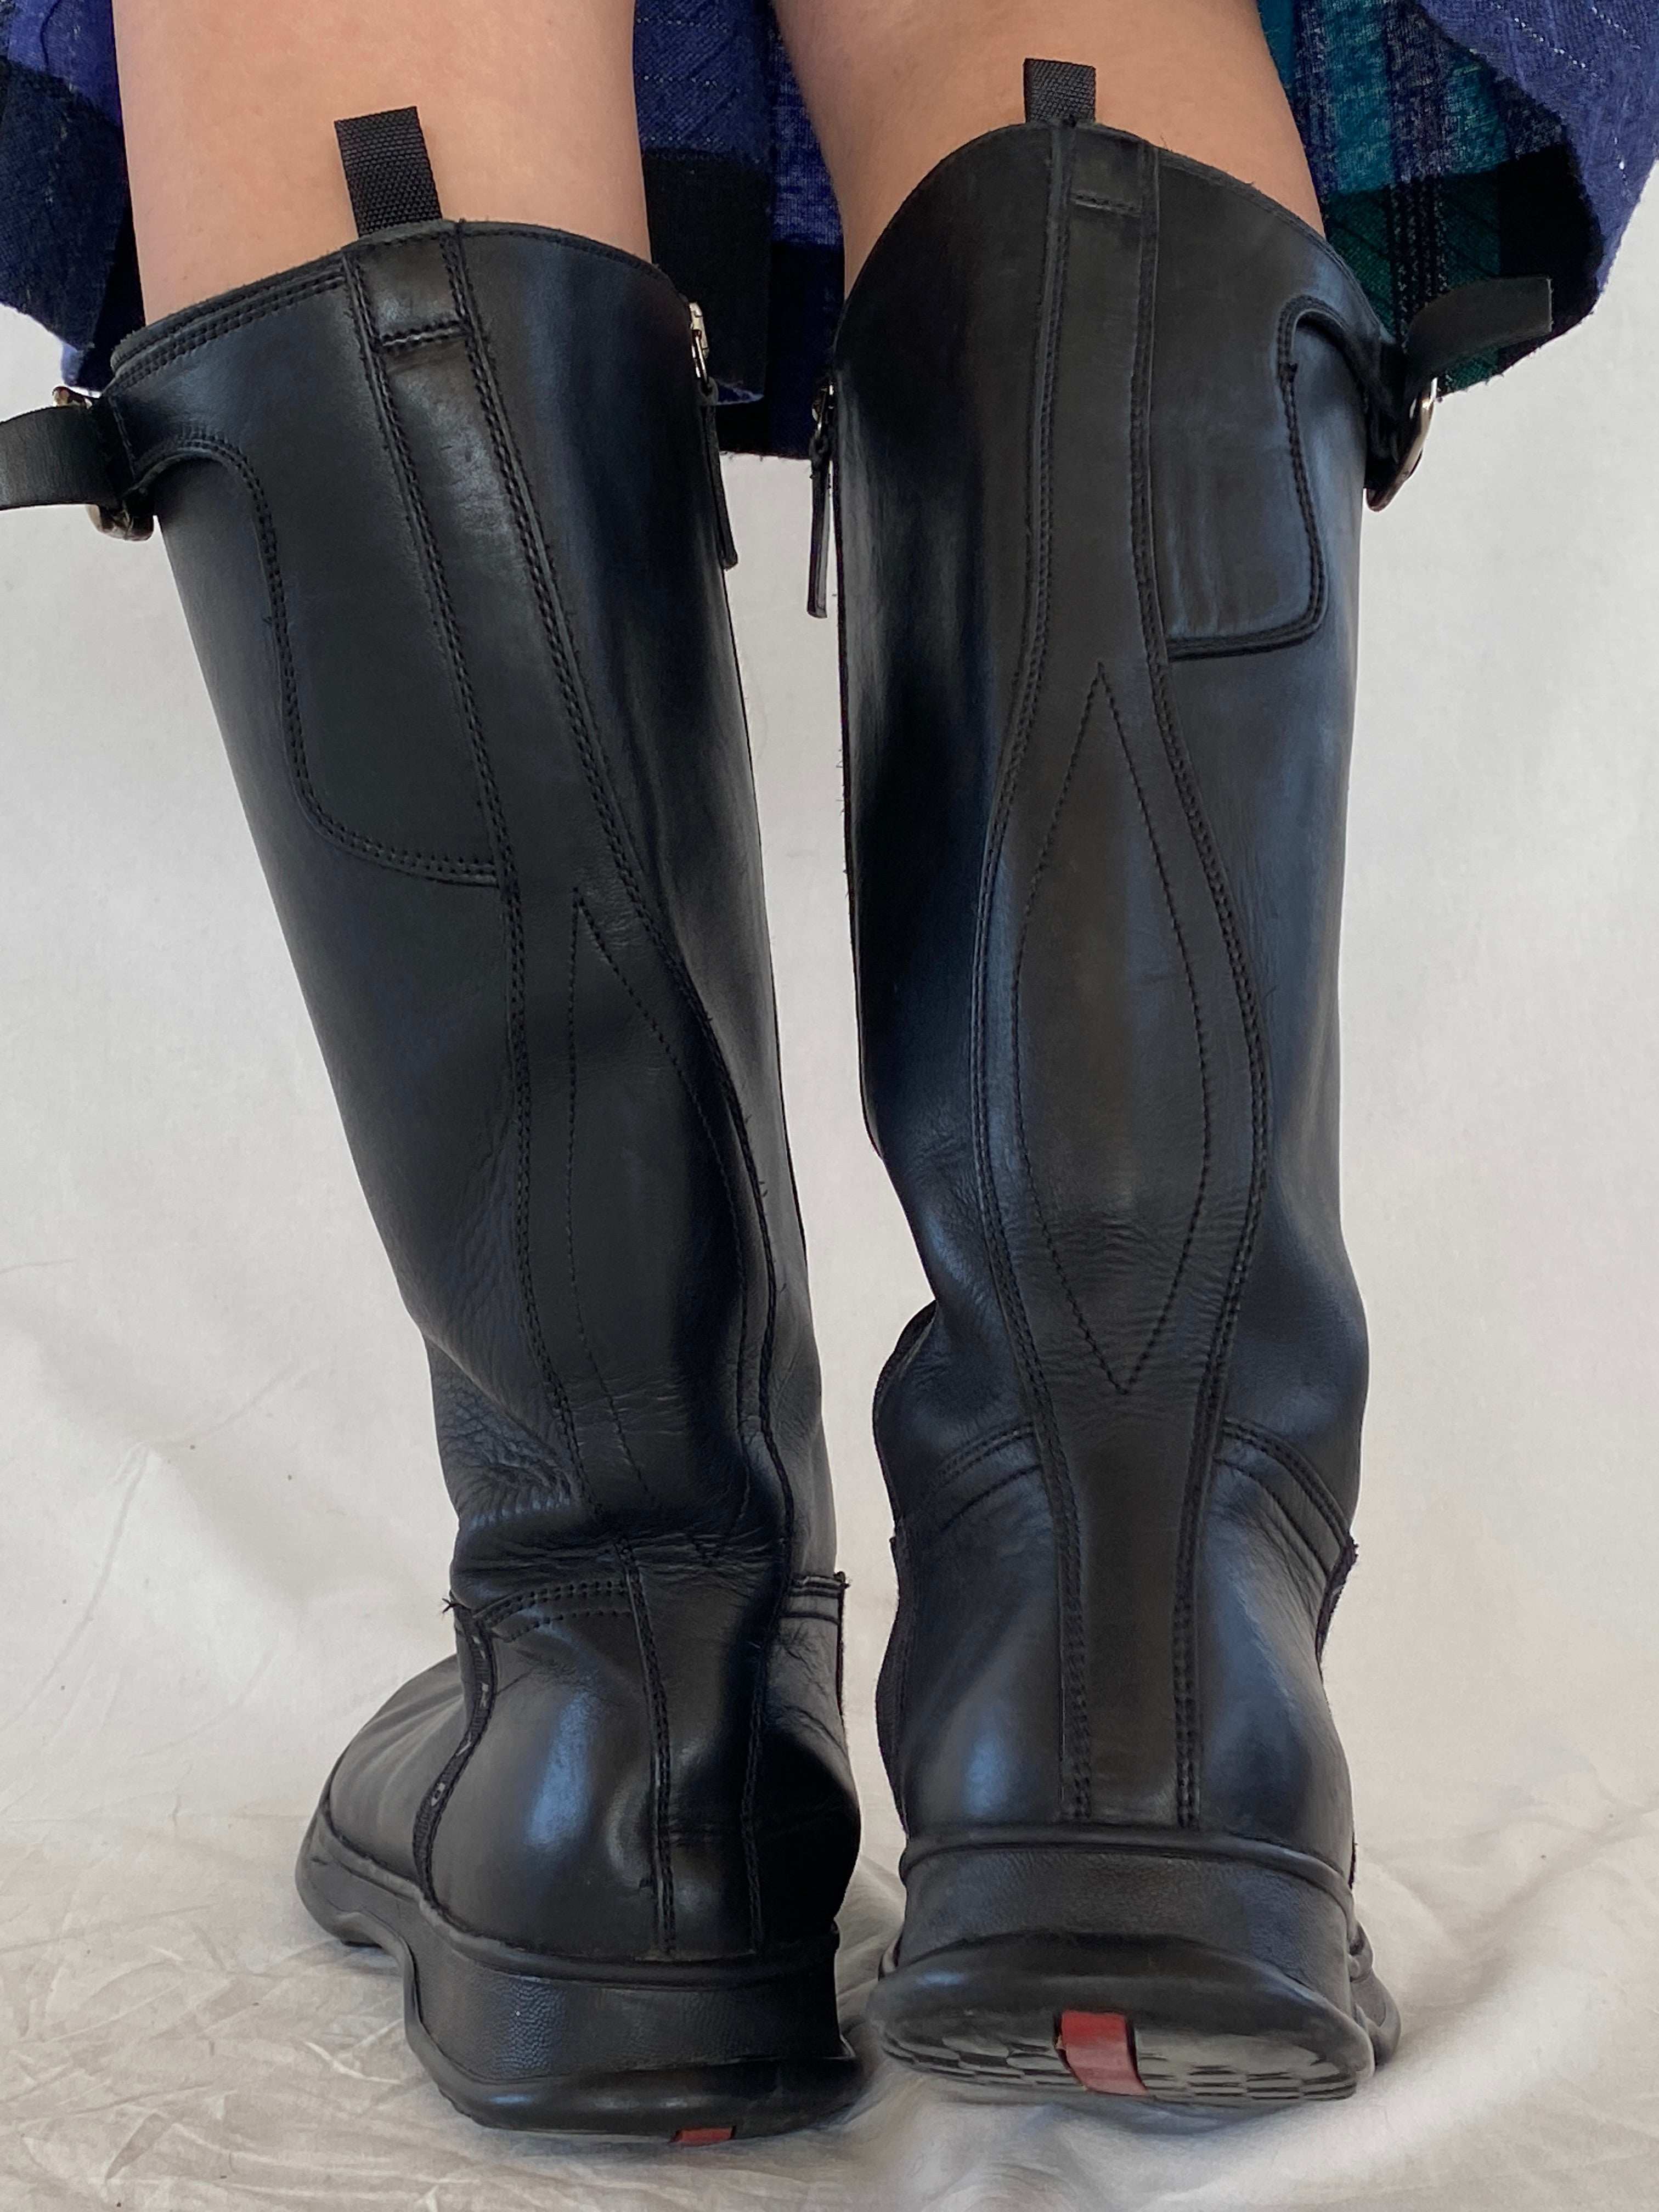 Vintage 90s PRADA Leather Moto boots - Balagan Vintage Boots 00s, 90s, Boots, Juana, NEW IN